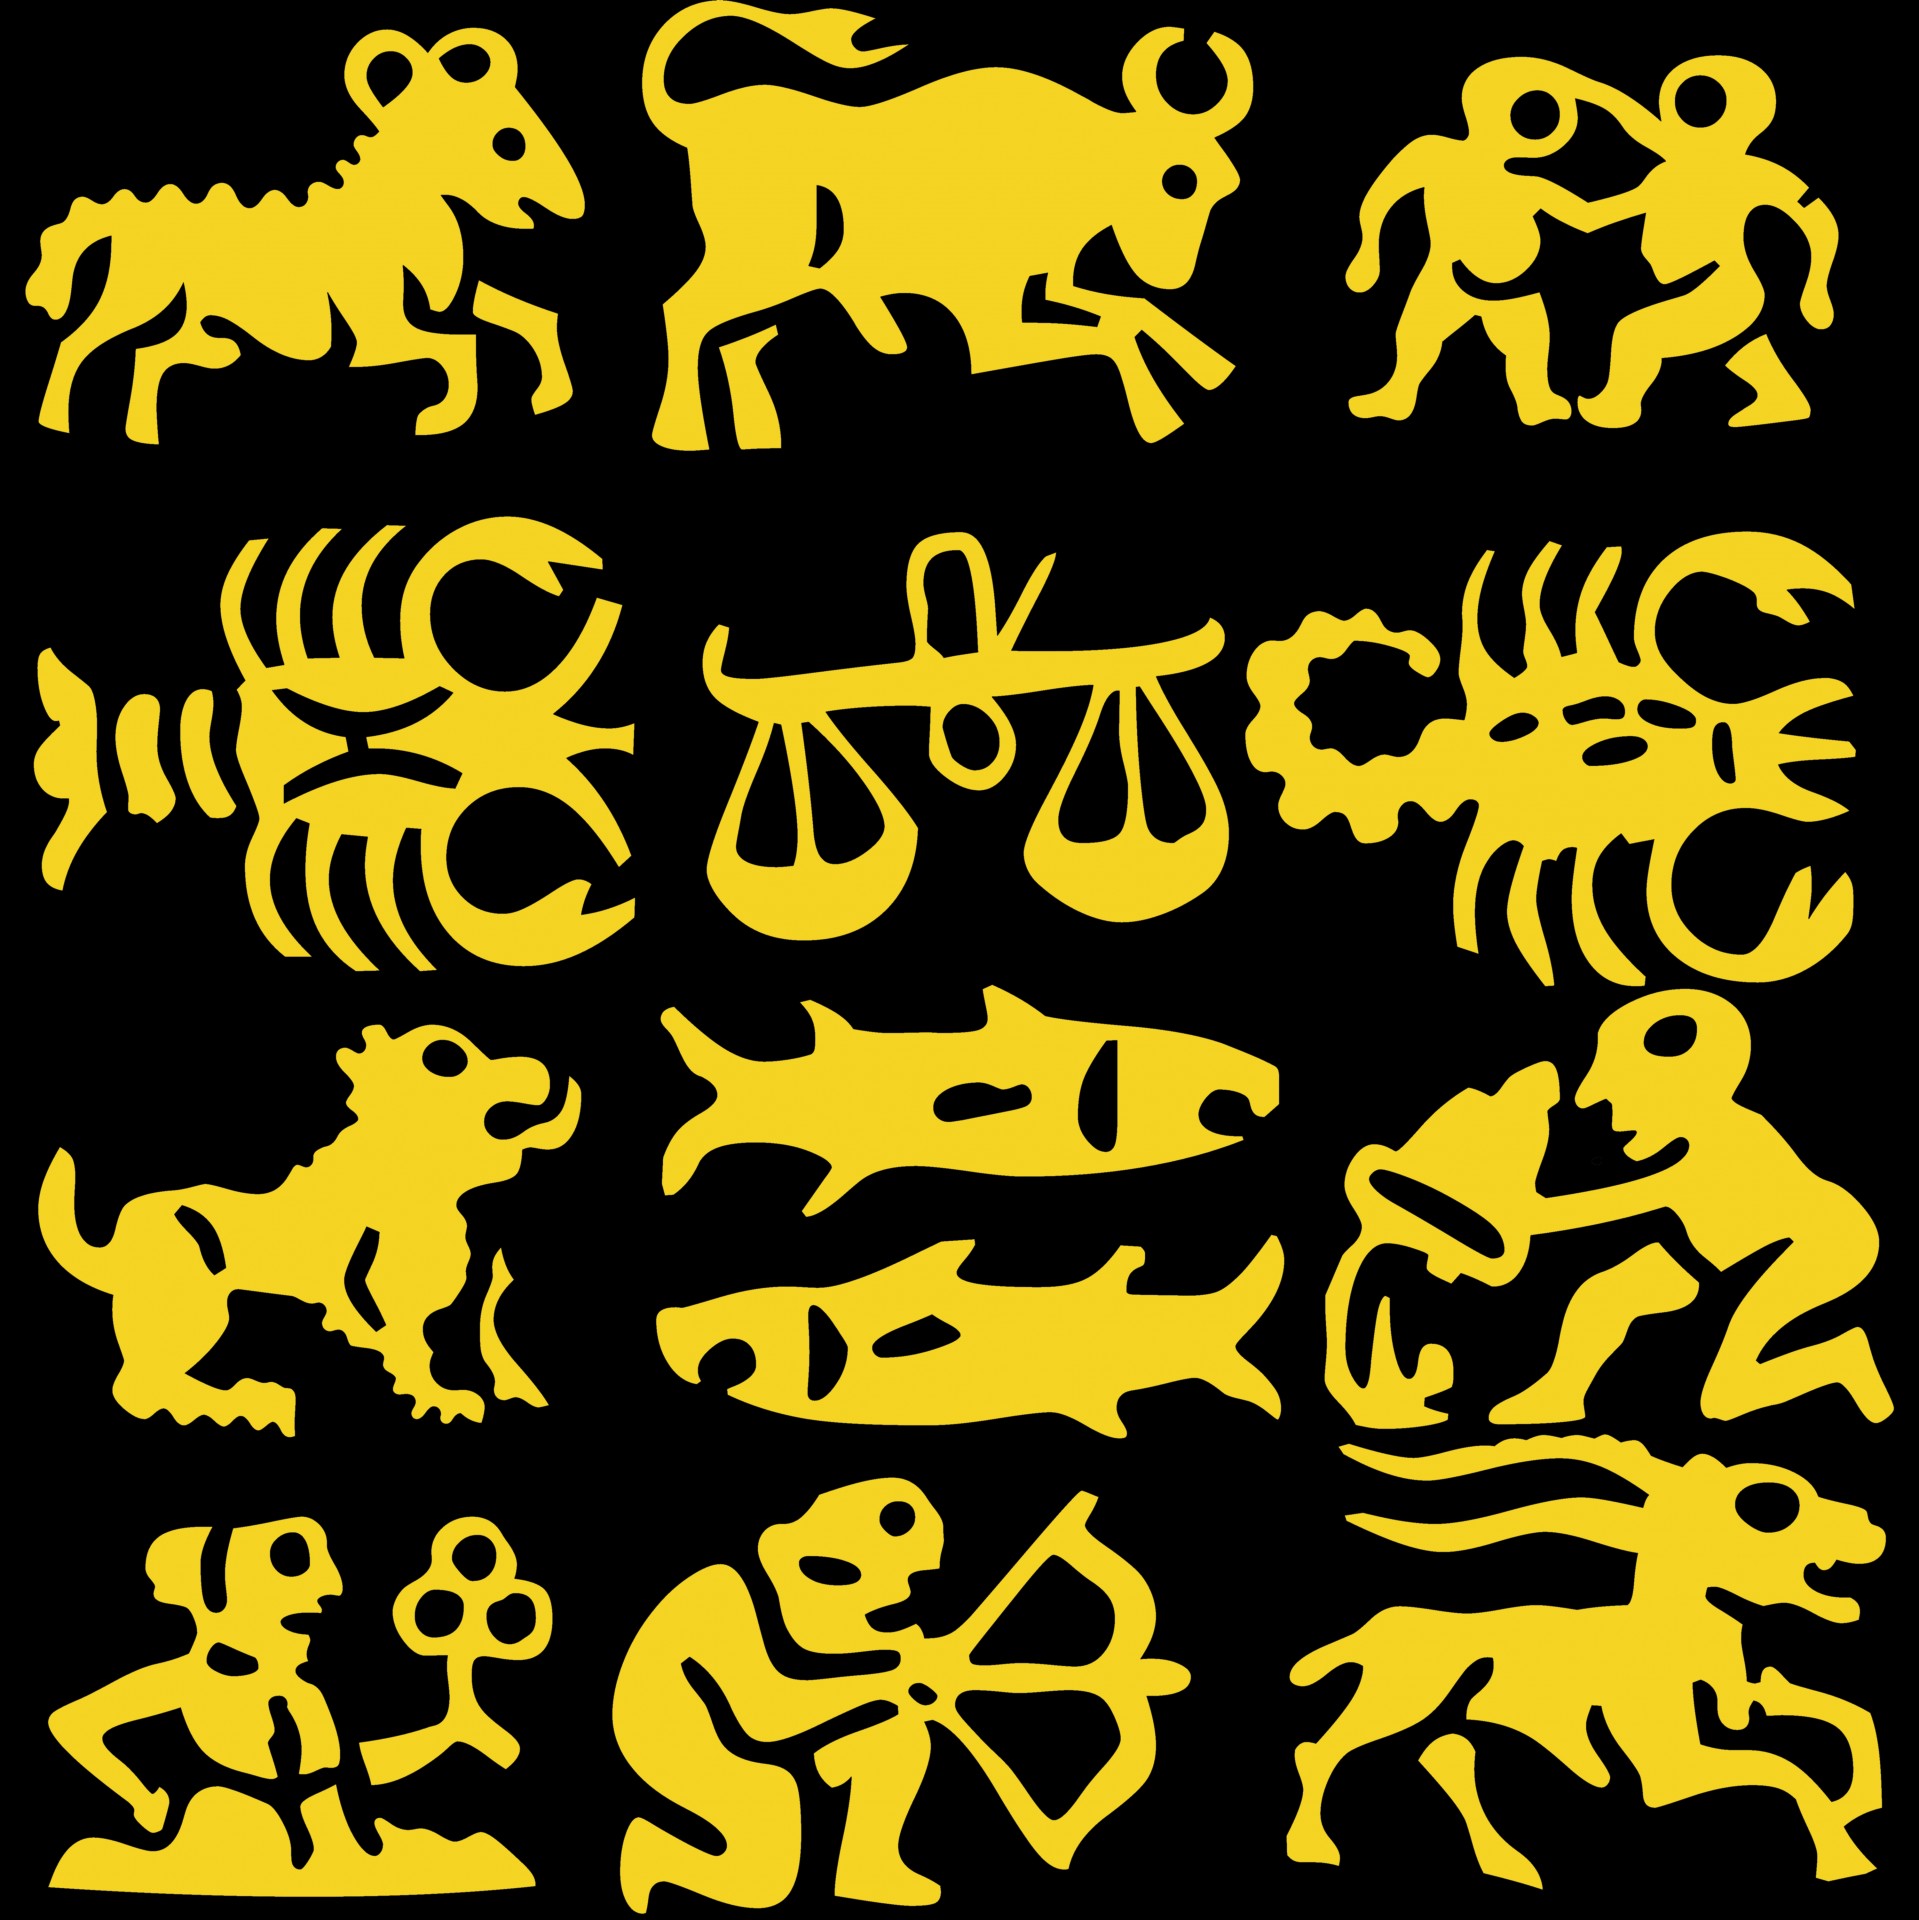 zodiac-signs-free-stock-photo-public-domain-pictures